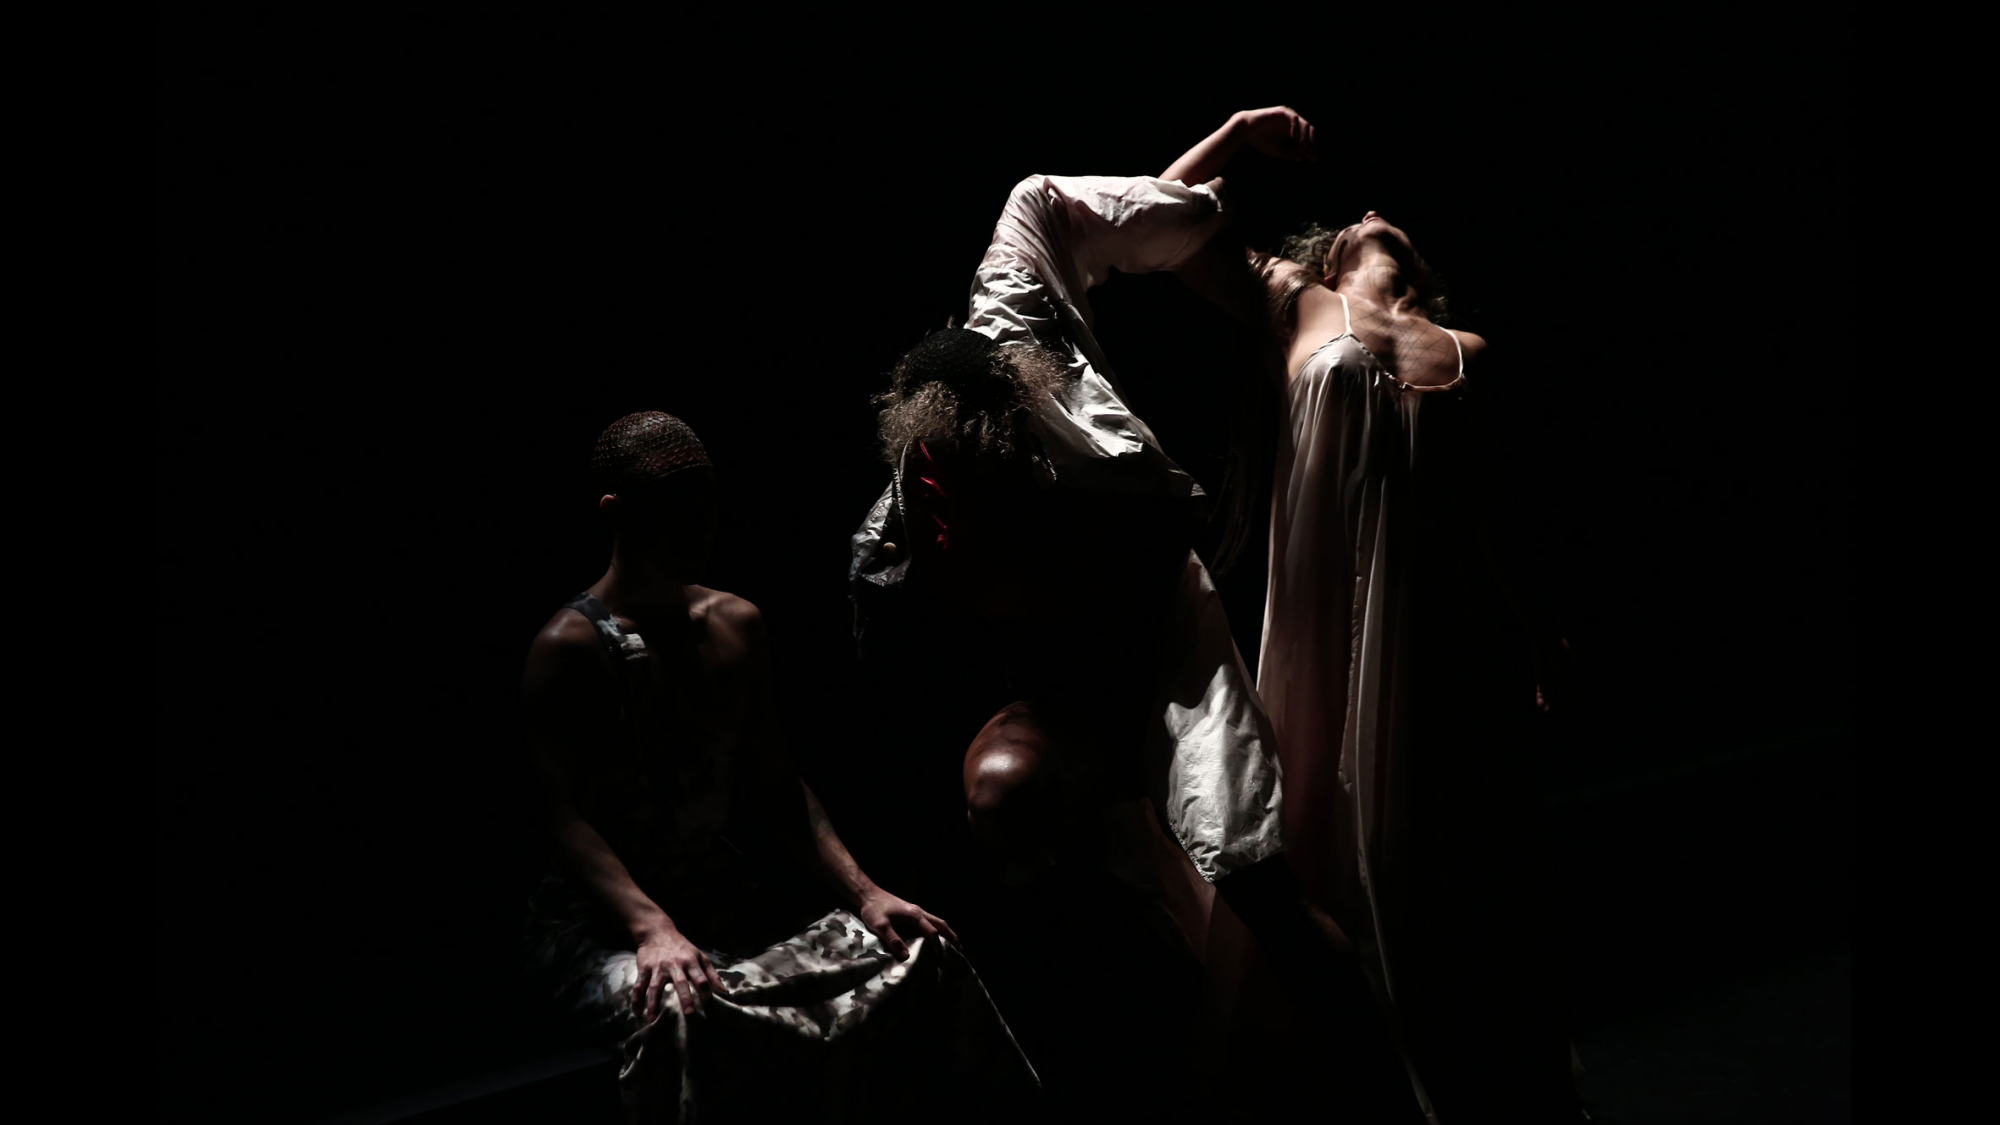 Three performers in chiaroscuro lighting. One figure is seated, another standing with arm intertwined with the third dancer who arches their back dramatically white standing. 